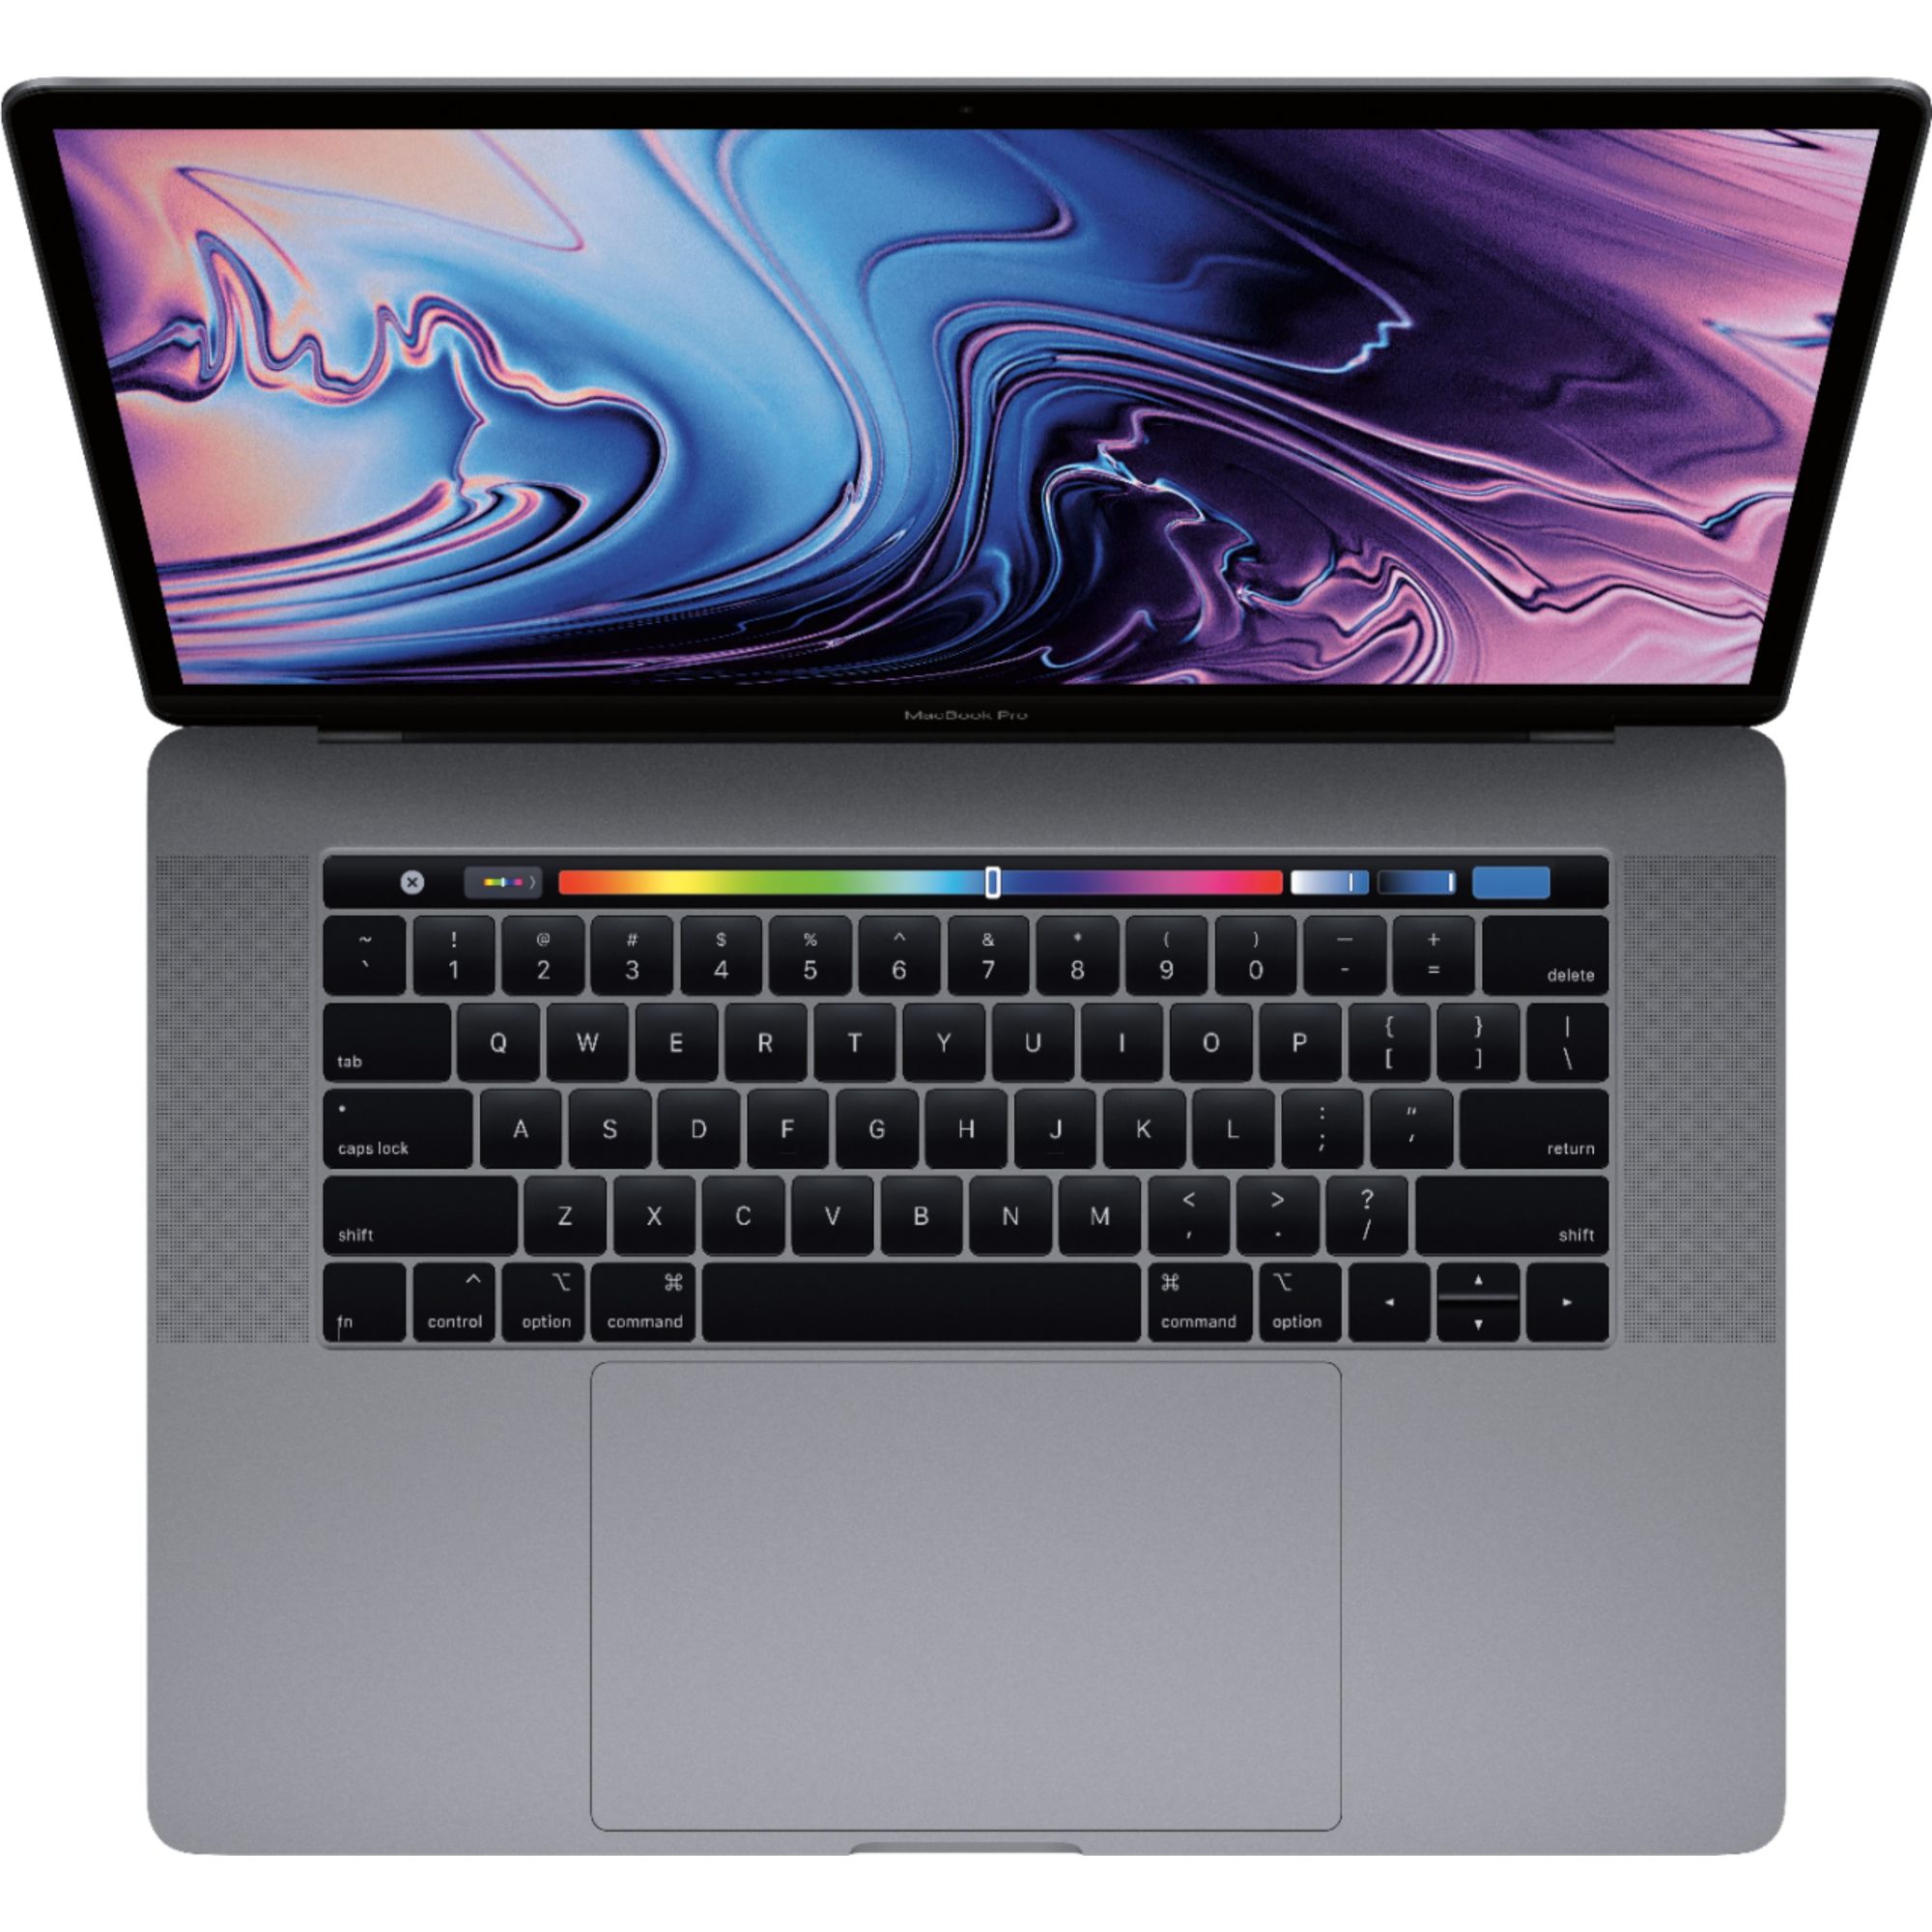 Restored Apple MacBook Pro 15.4-inch 2019 with Touch Bar MV902LL/A, Intel  Core i7, 256GB, 16GB RAM Space Gray (Refurbished)